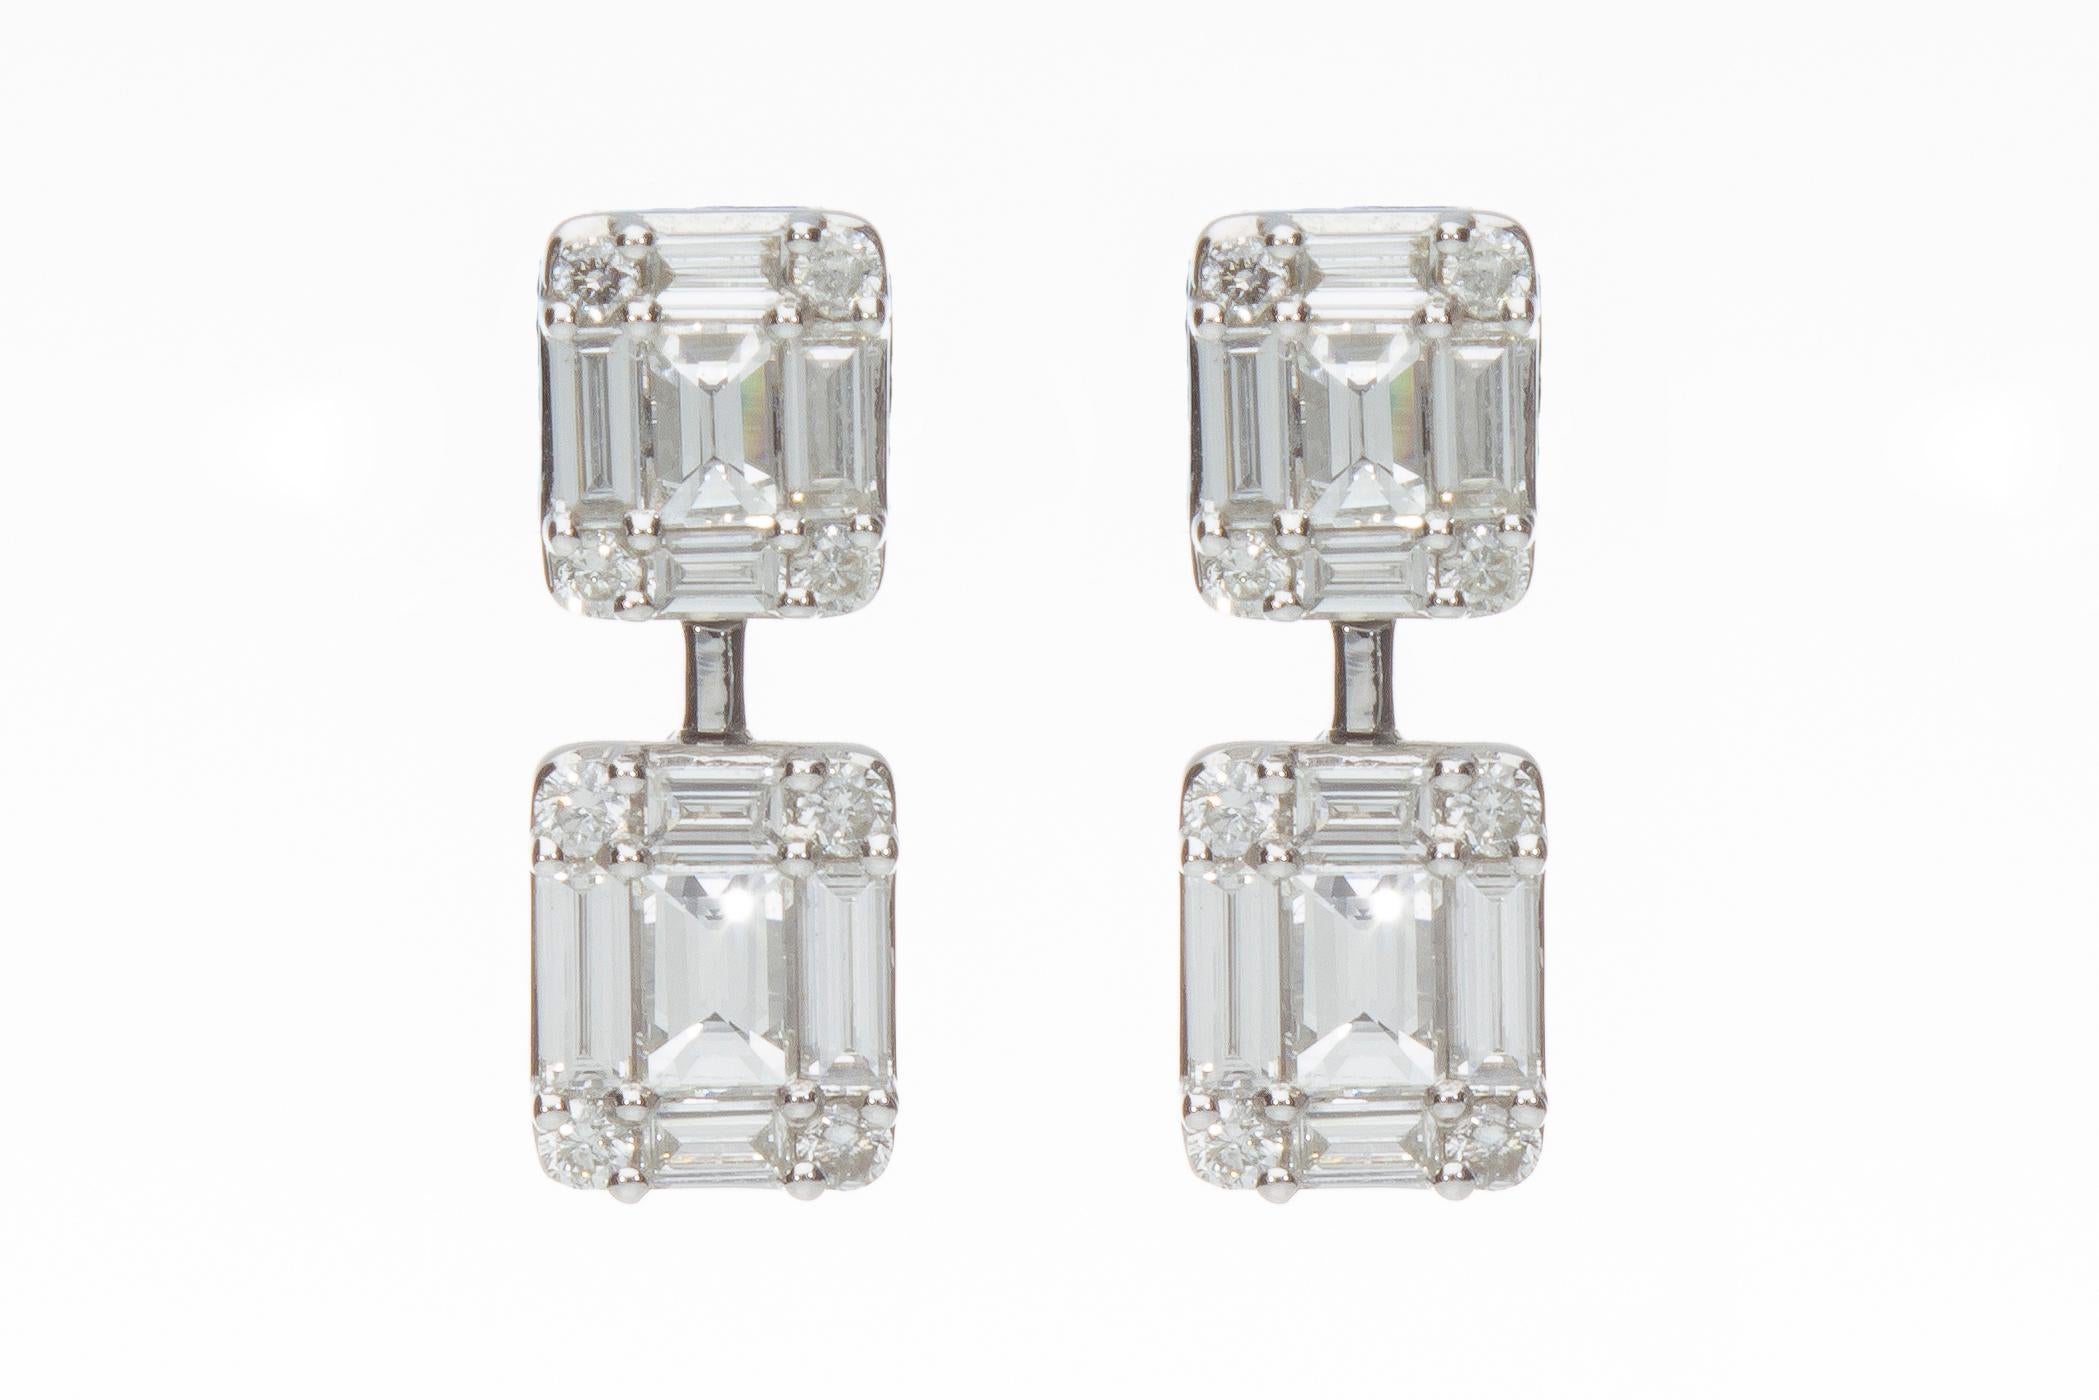 The earrings are made up of four rectangles made up of thirty-six baguette and brilliant cut diamonds, 
for a total weight of 1.15 ct.
The earrings are in 18 Kt white gold.
Weight of the earrings: 3.5 grams

•THE MANUFACTURE IS MADE IN ITALY.